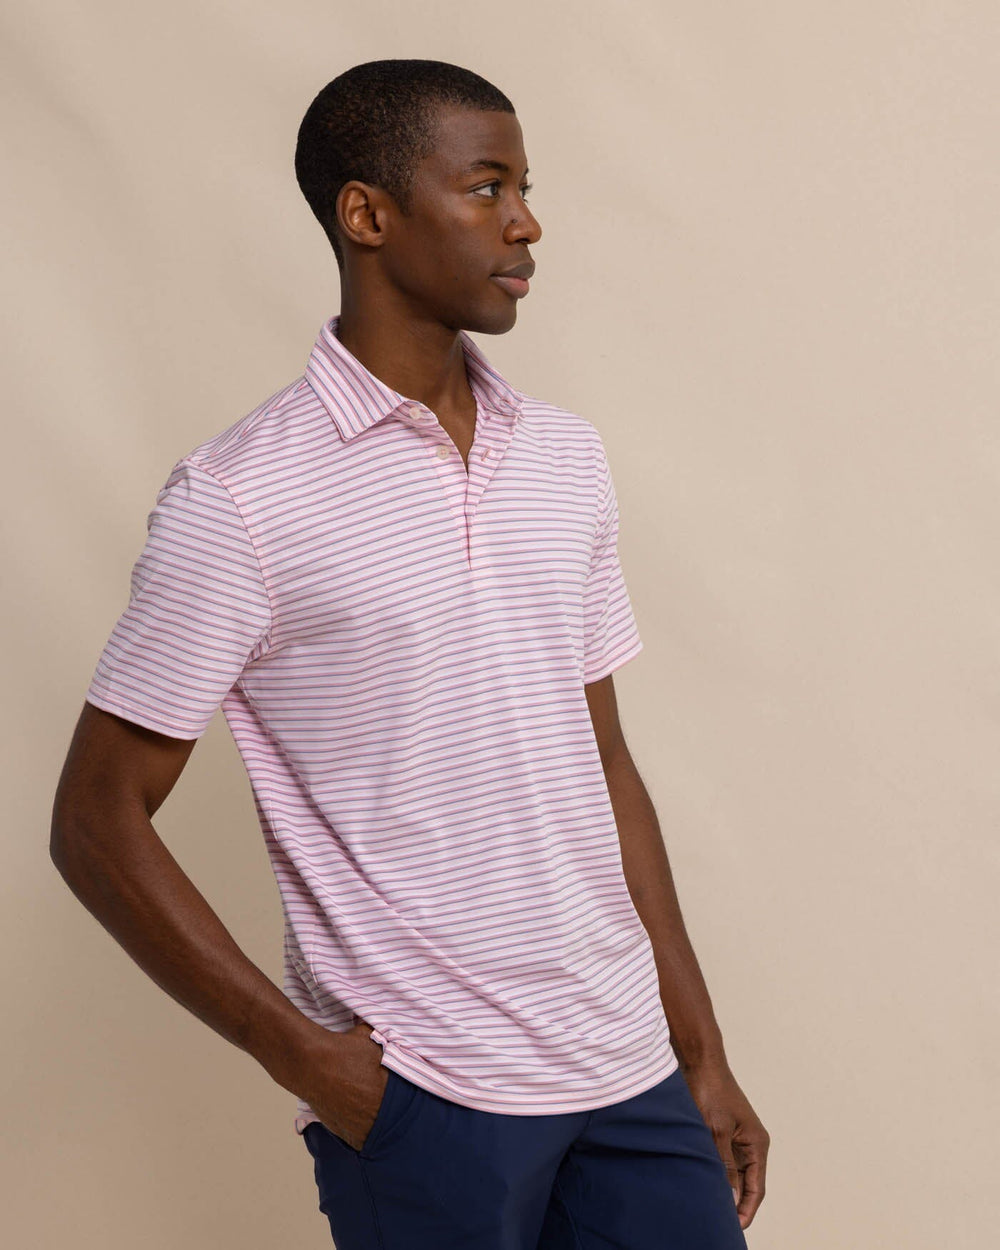 The front view of the Southern Tide Driver Carova Stripe Polo Shirt by Southern Tide - Light Pink